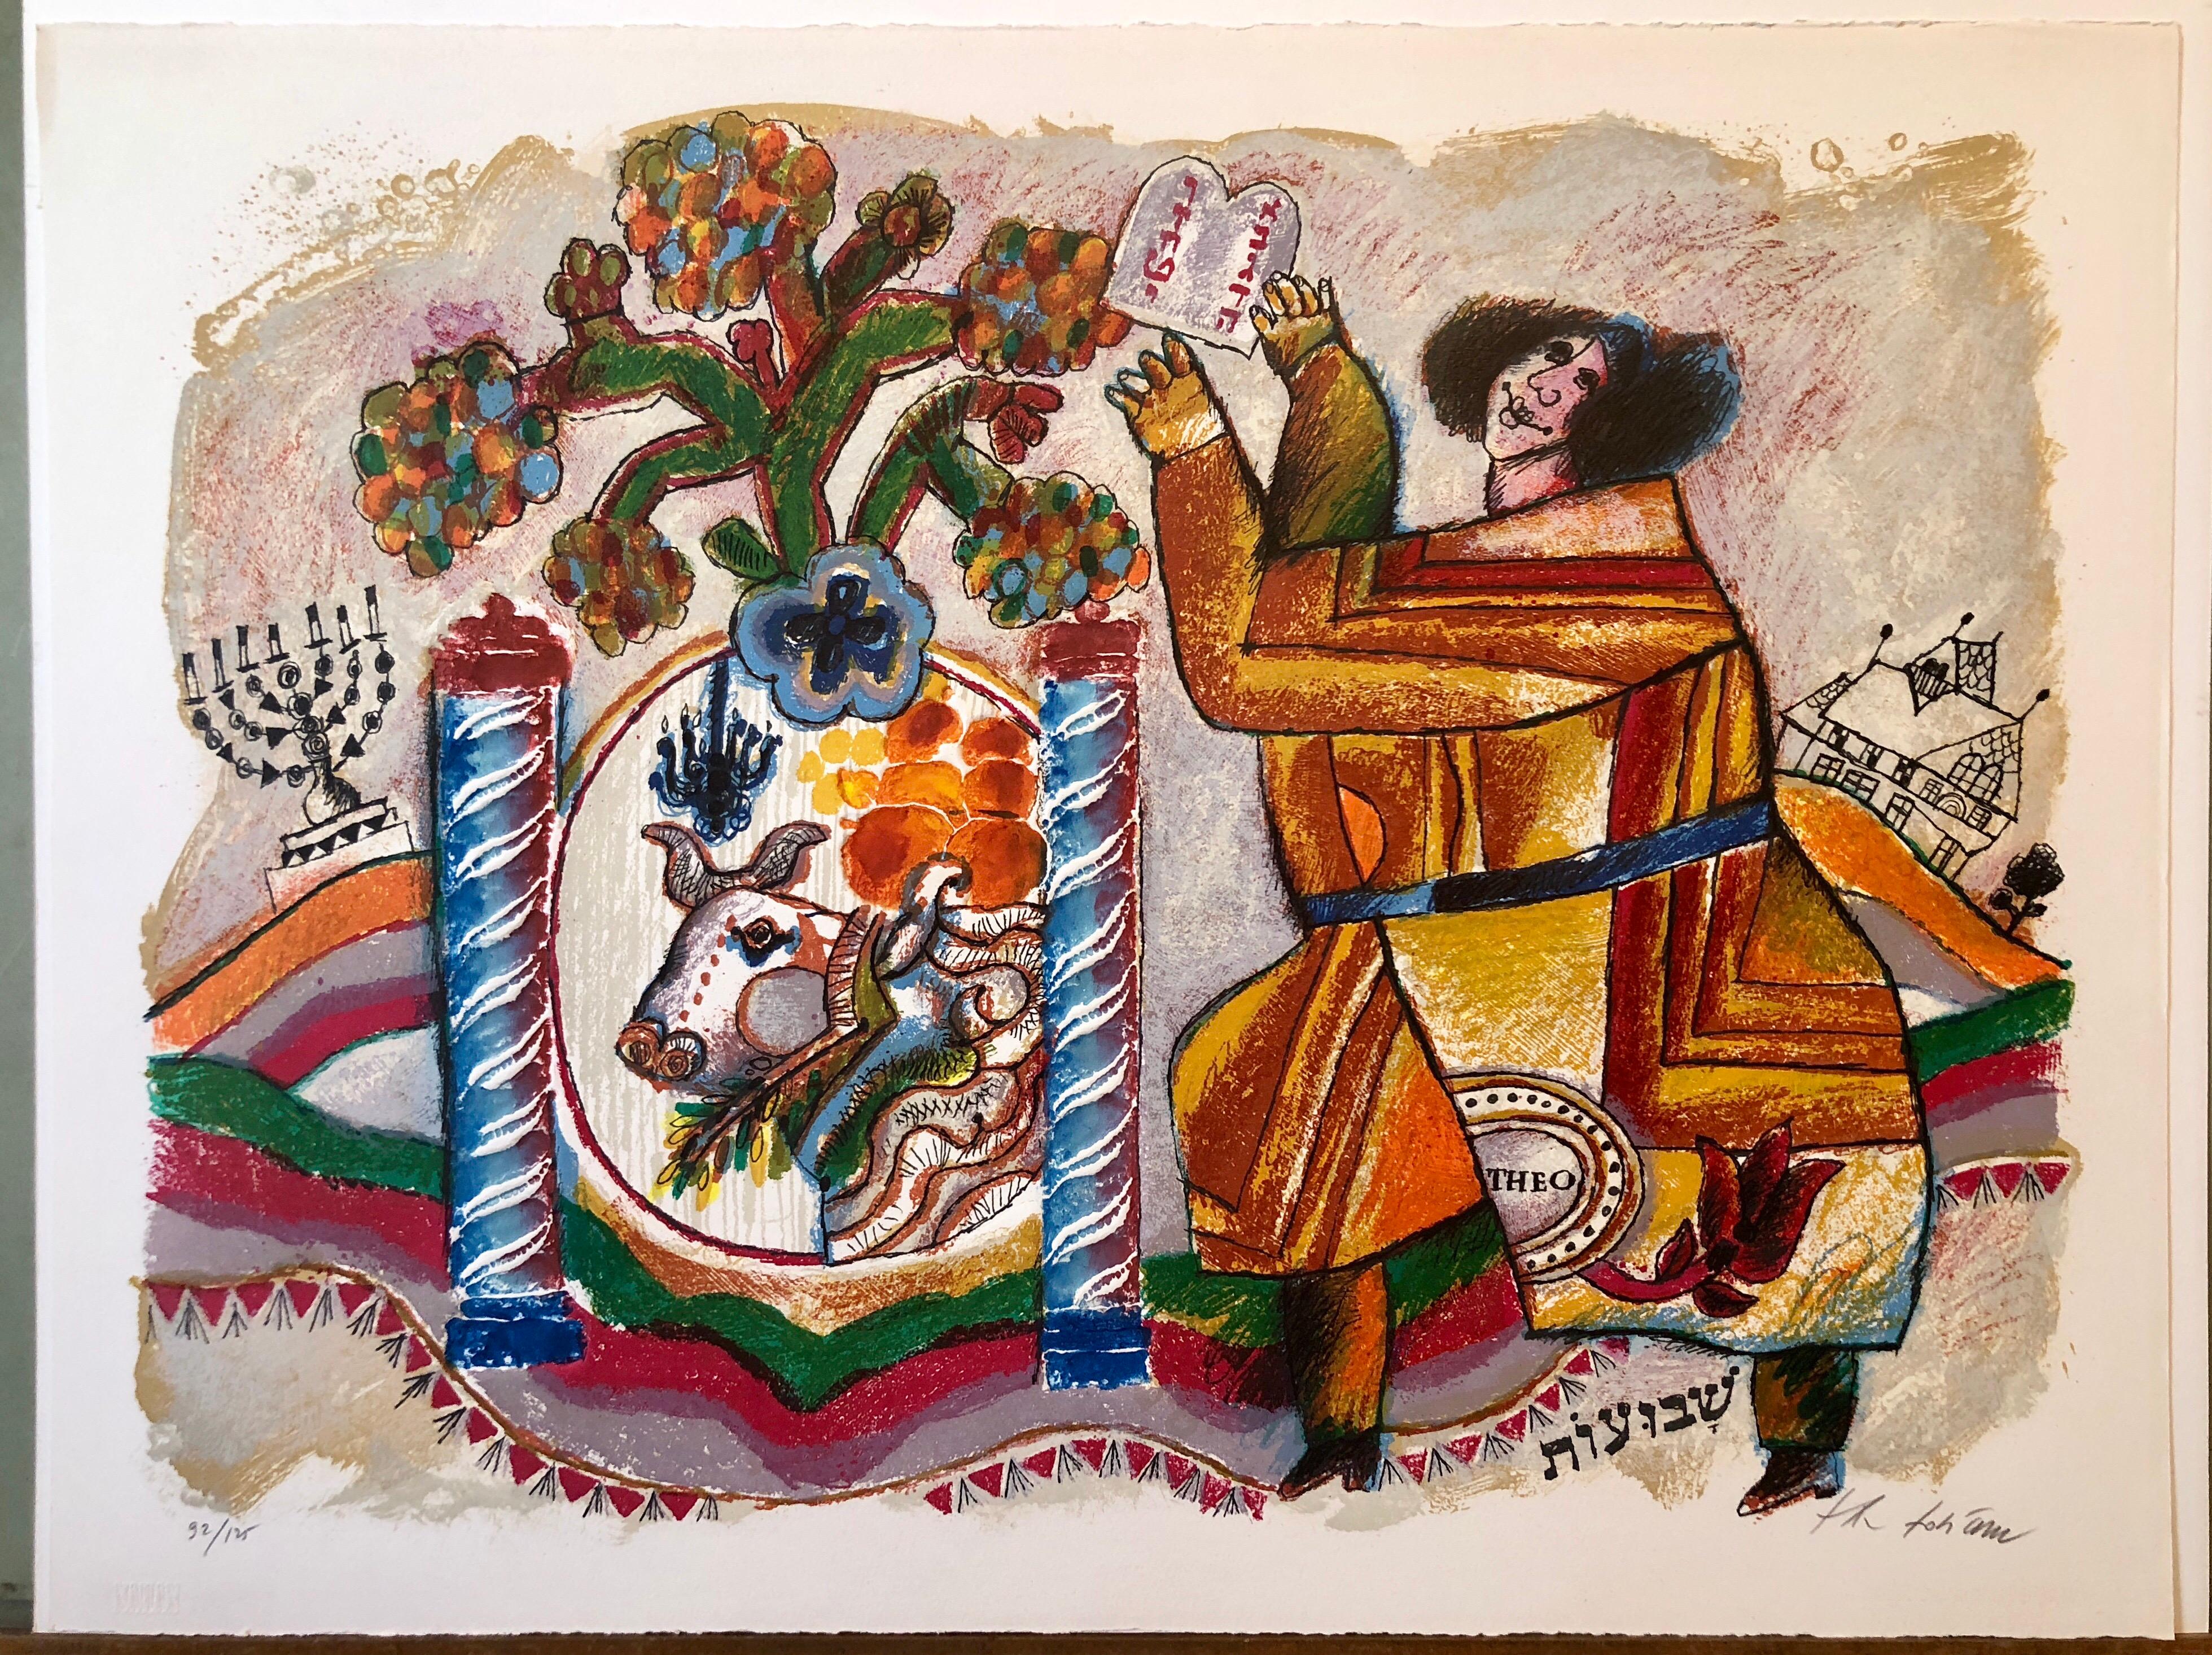 Theo Tobiasse 
Suite: Shavuot Festival 
Year: 1984
Medium: Original carborundum embossed etching lithograph in colors on Arches paper (deckle edged paper)
Signature: Hand signed by the artist 
Publisher Nahan Gallery, New Orleans
Theo Tobiasse, born